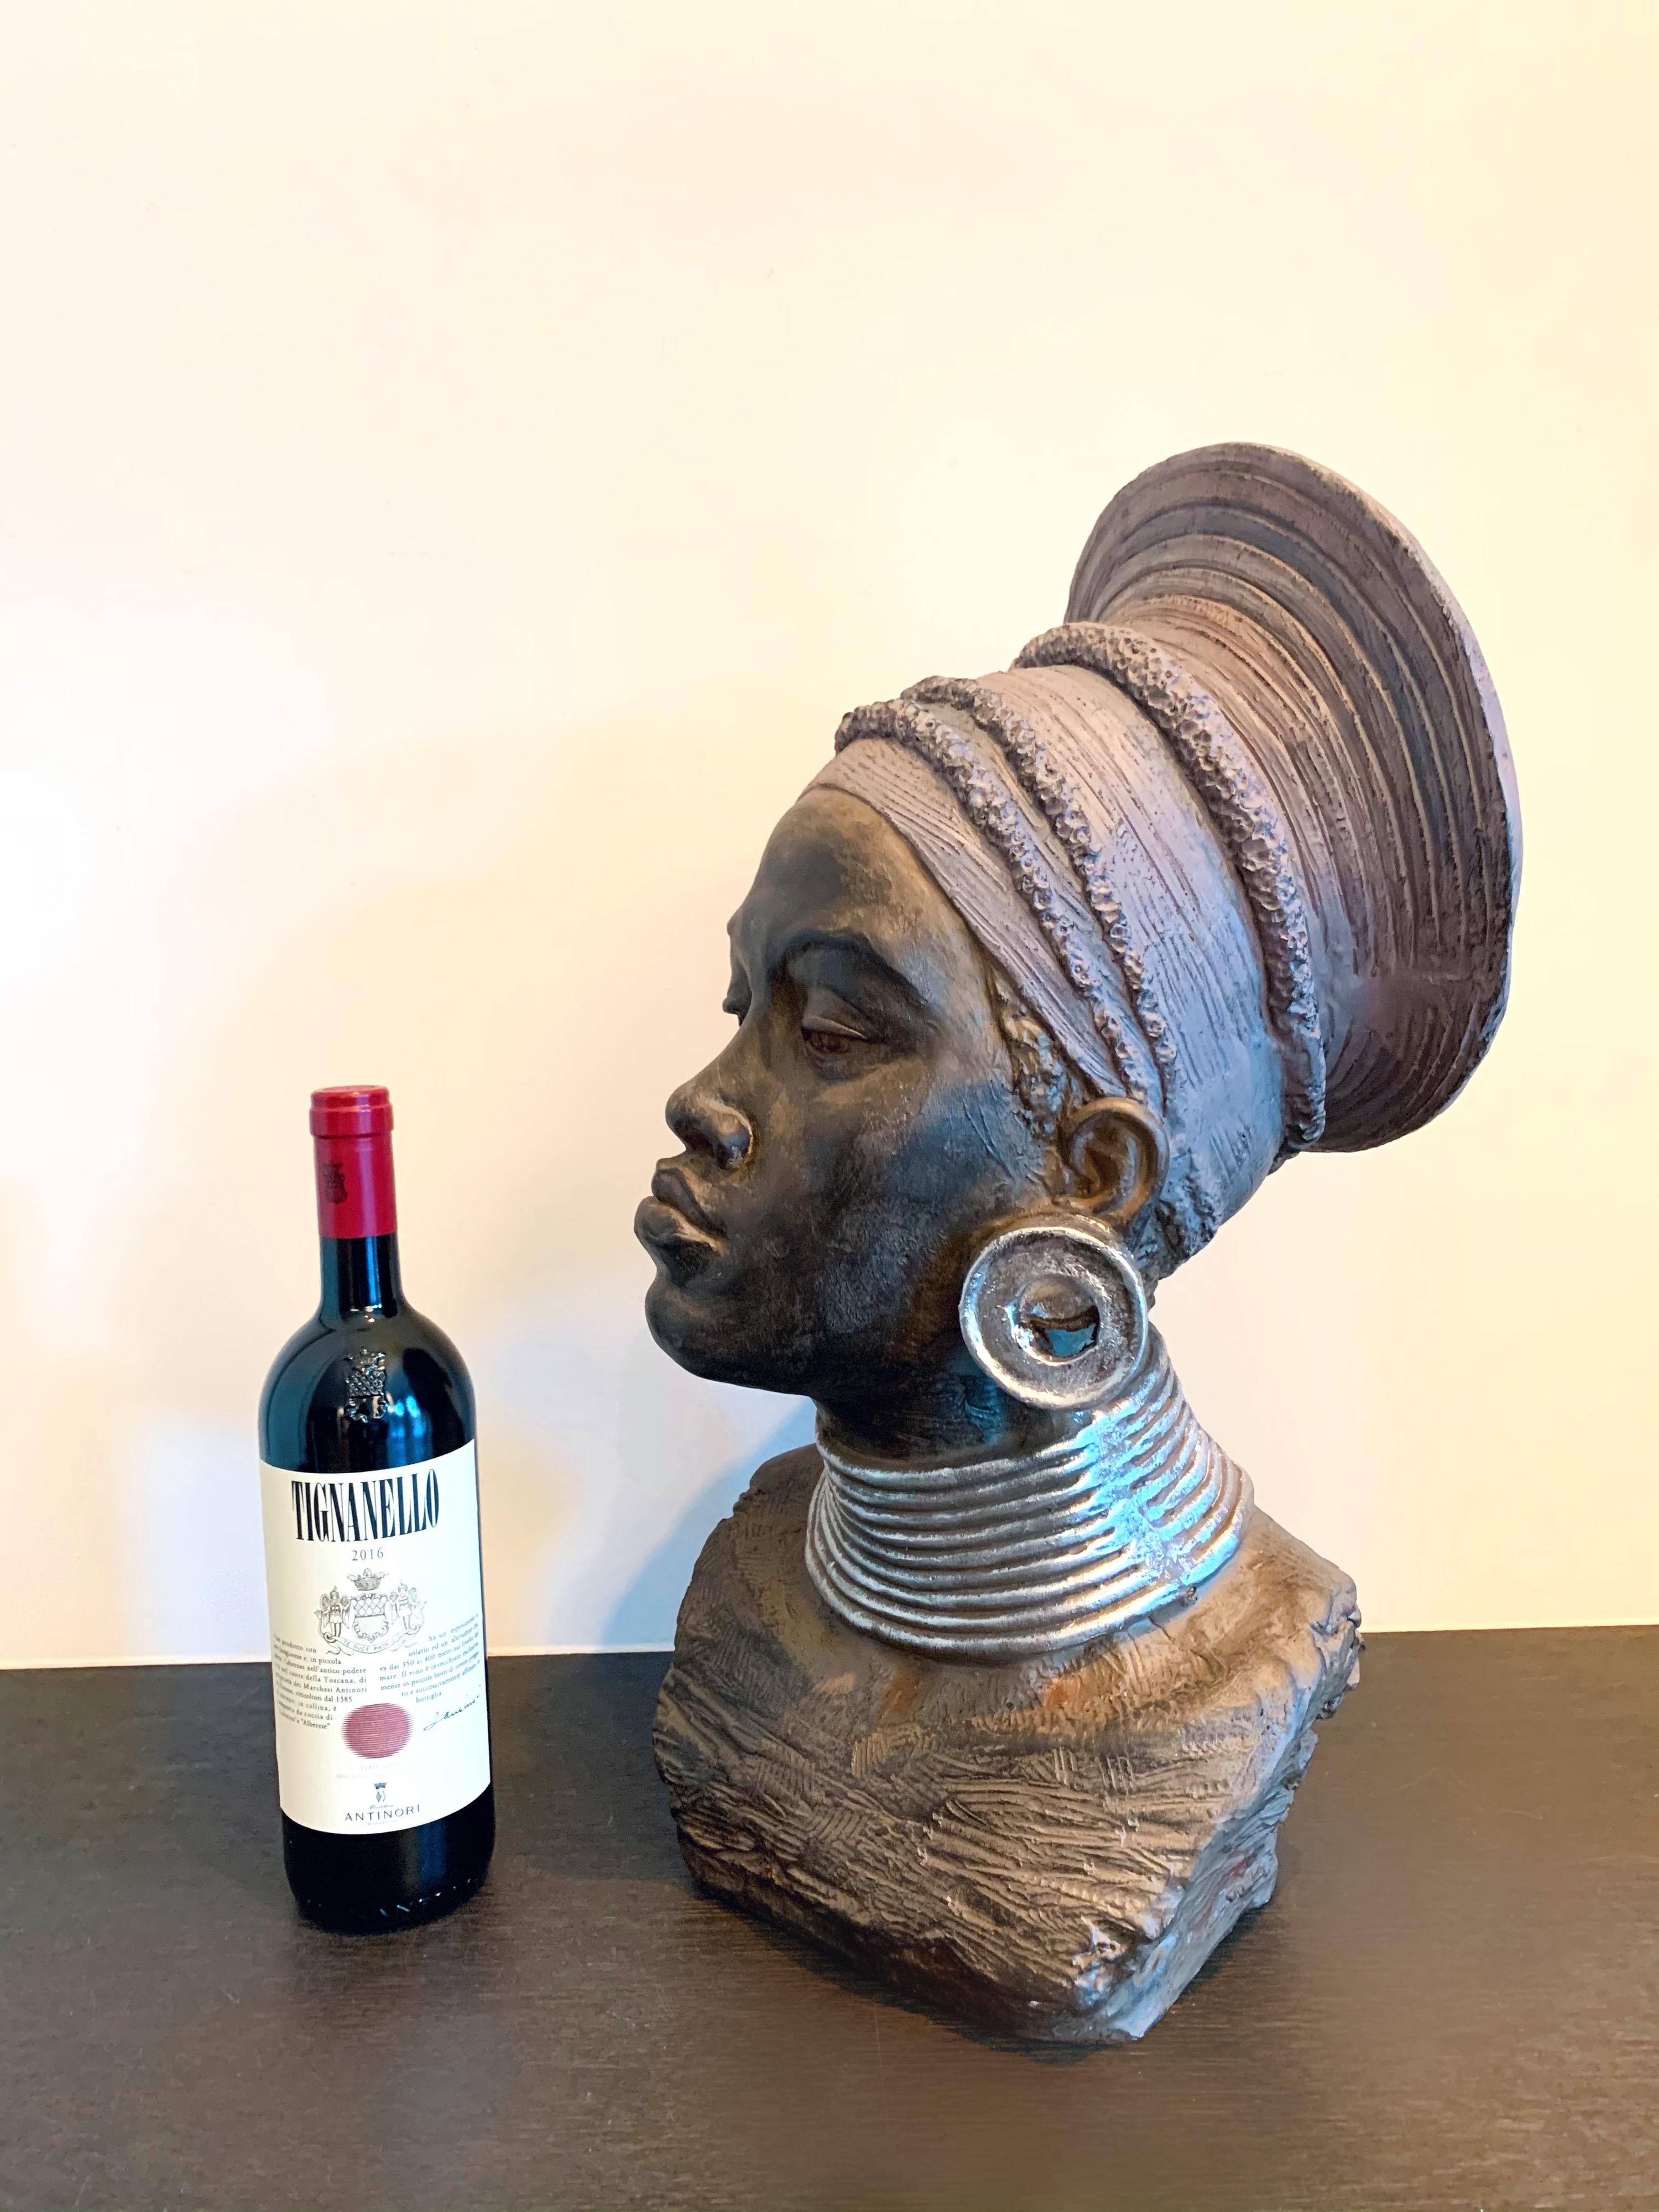 Large head sculpture of an African Woman - Tropical Exotic sculpture - Sculpture by Unknown